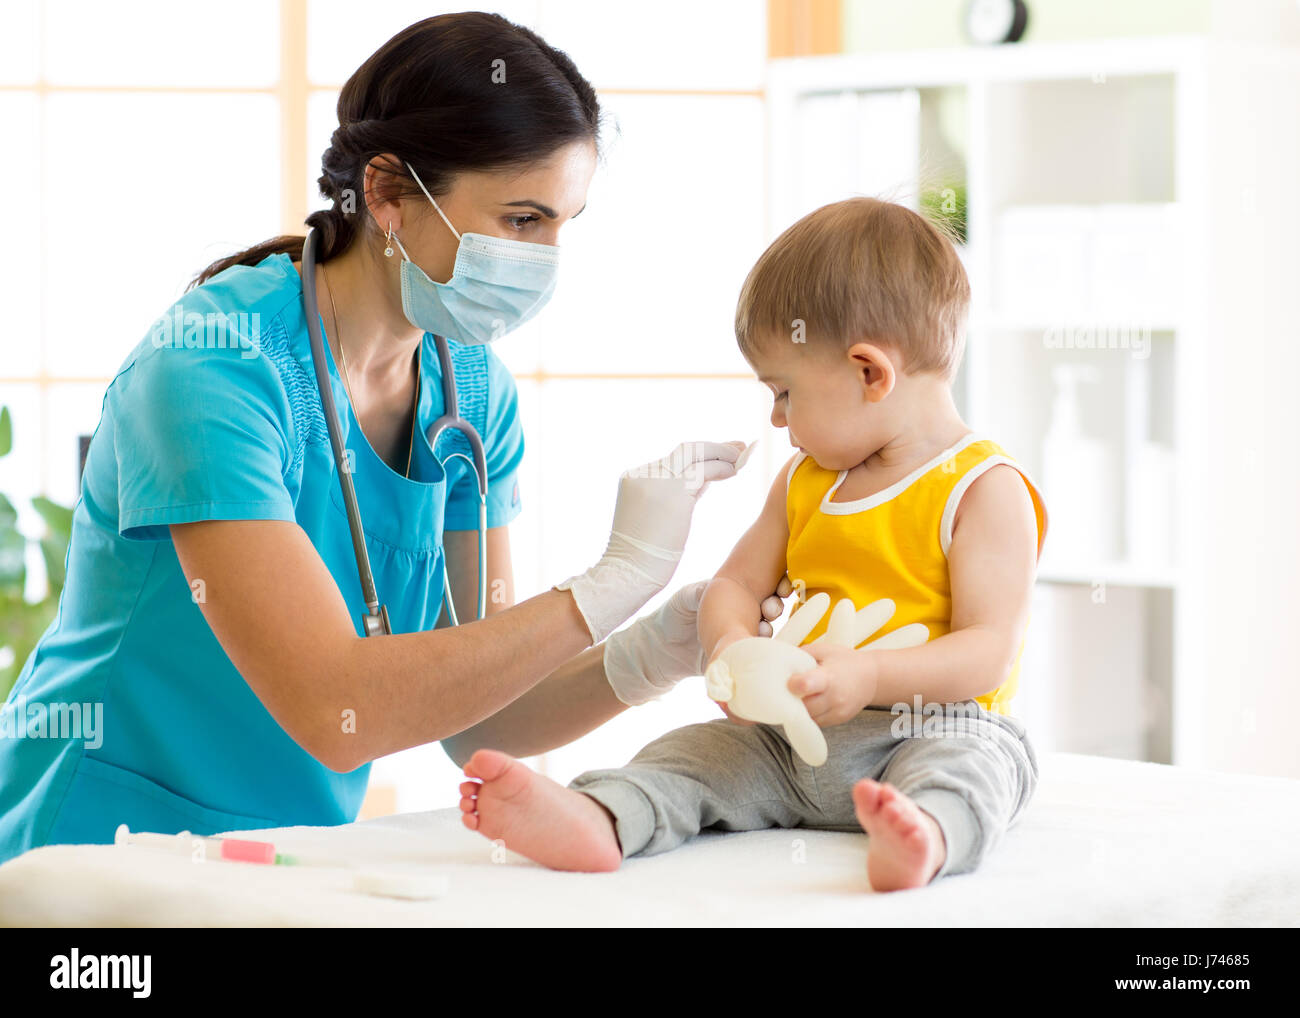 Doctor holds an injection vaccination the child Stock Photo